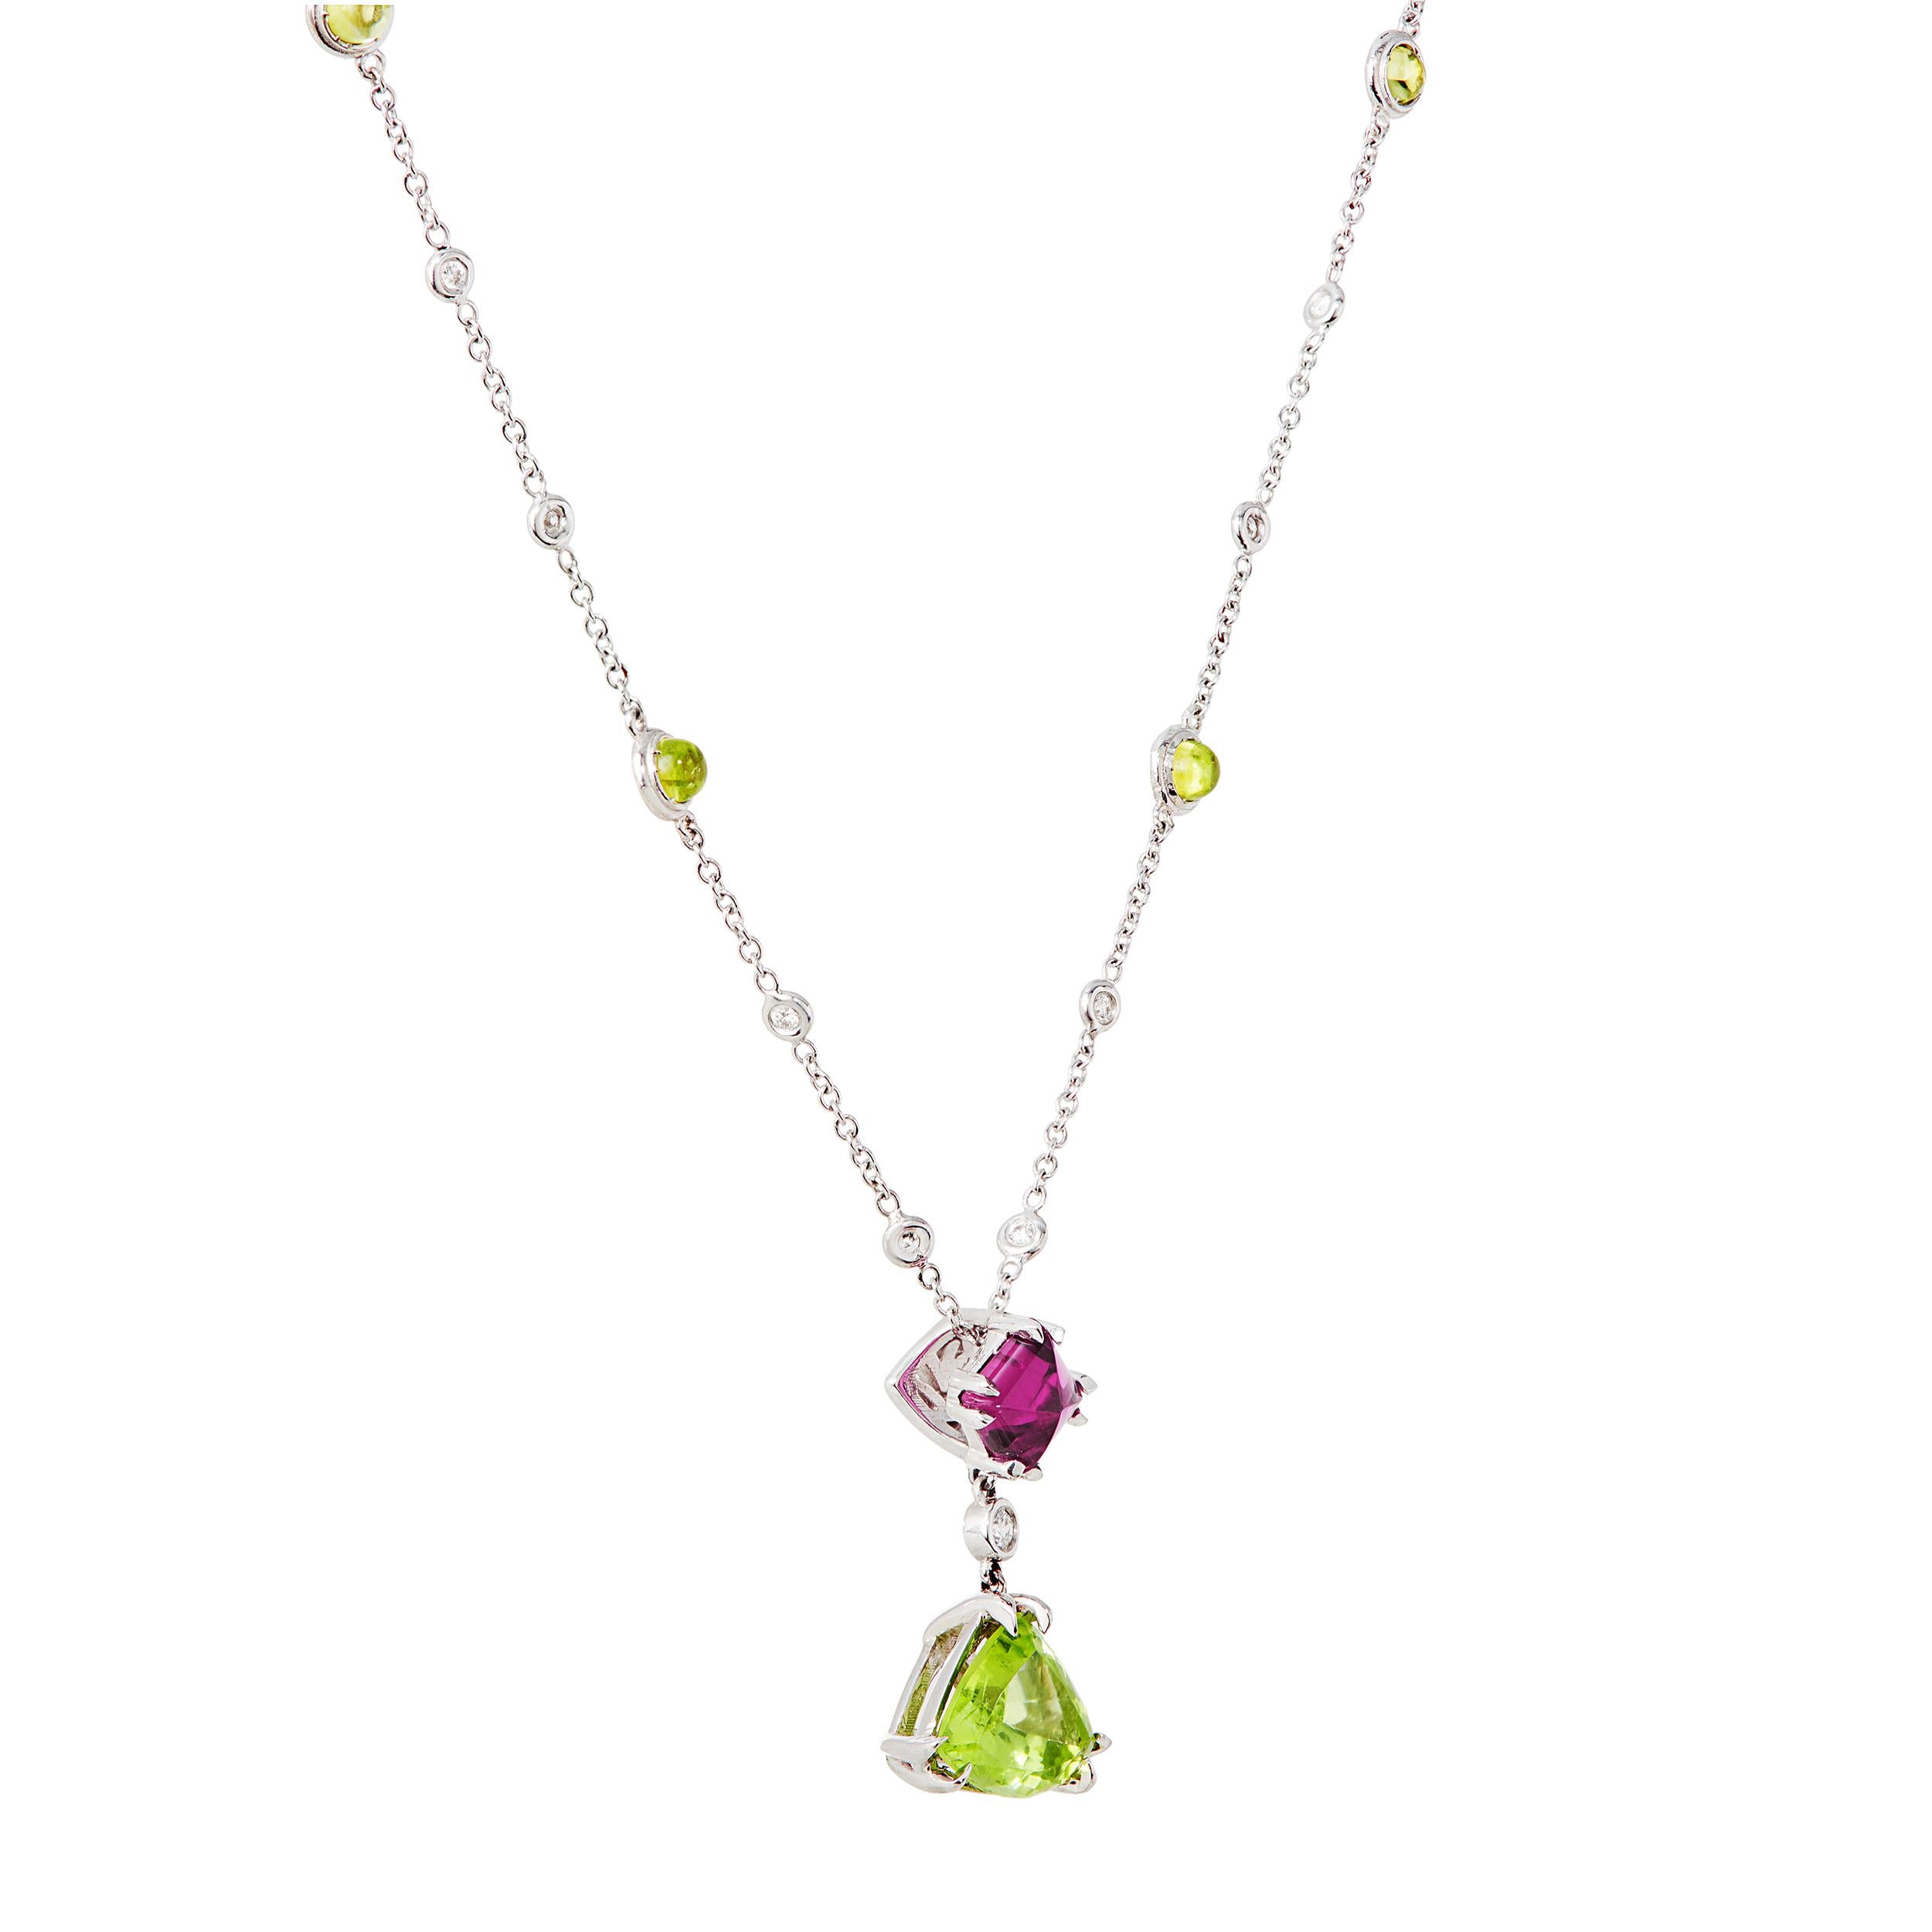 The play of color between the Sugarloaf Cut Rubellite Tourmaline and Peridot are reminiscent of a sweet shop with their vibrance and frivolity. Part of a one of a kind Kiersten Elizabeth set where comfort and versatility are paramount.

There are